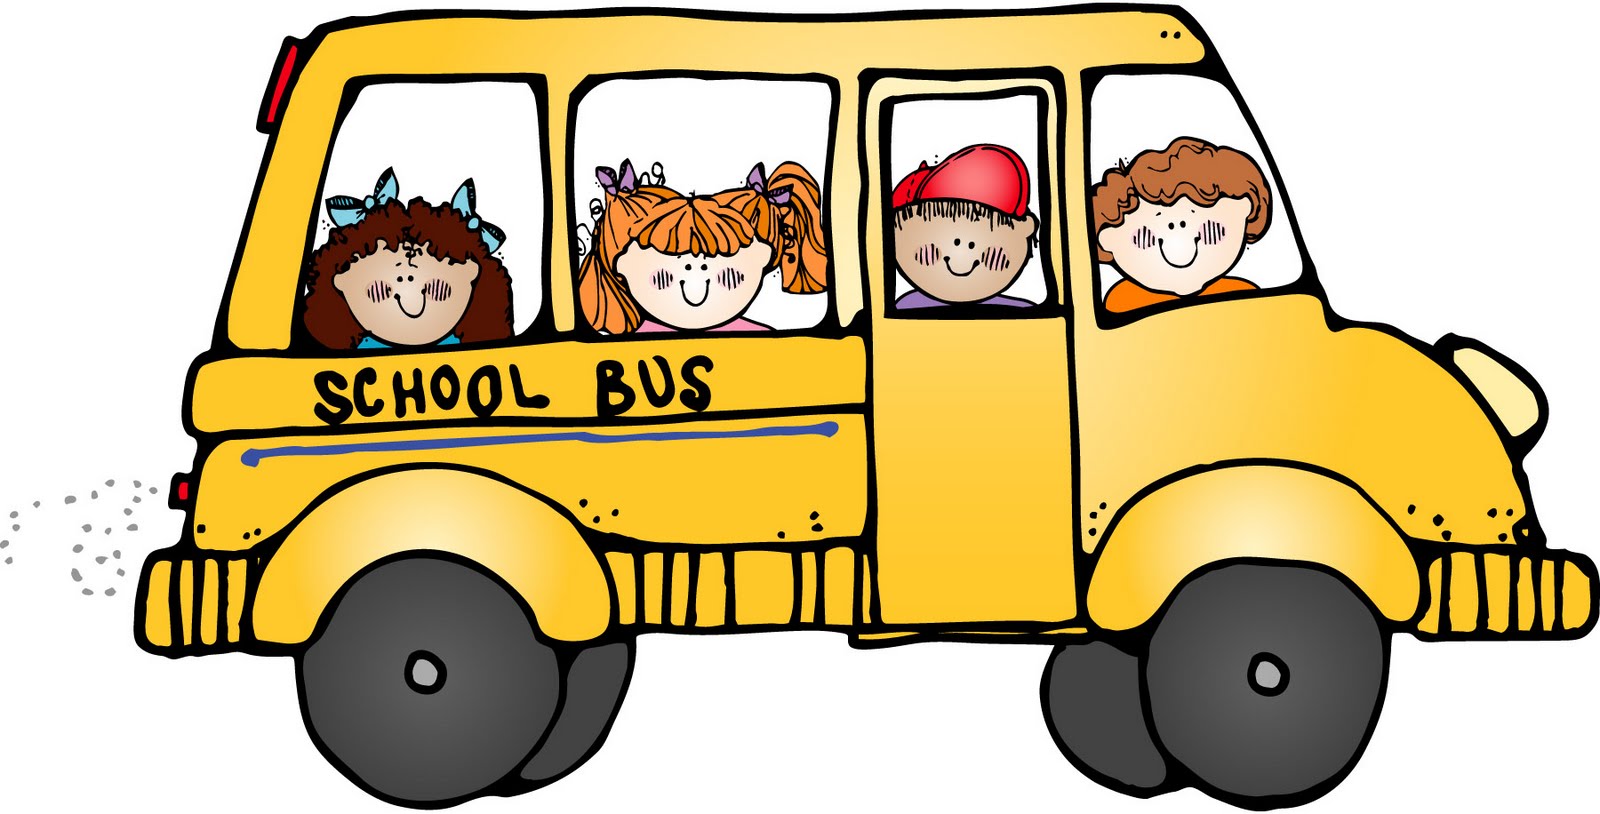 free clipart of school buses - photo #26